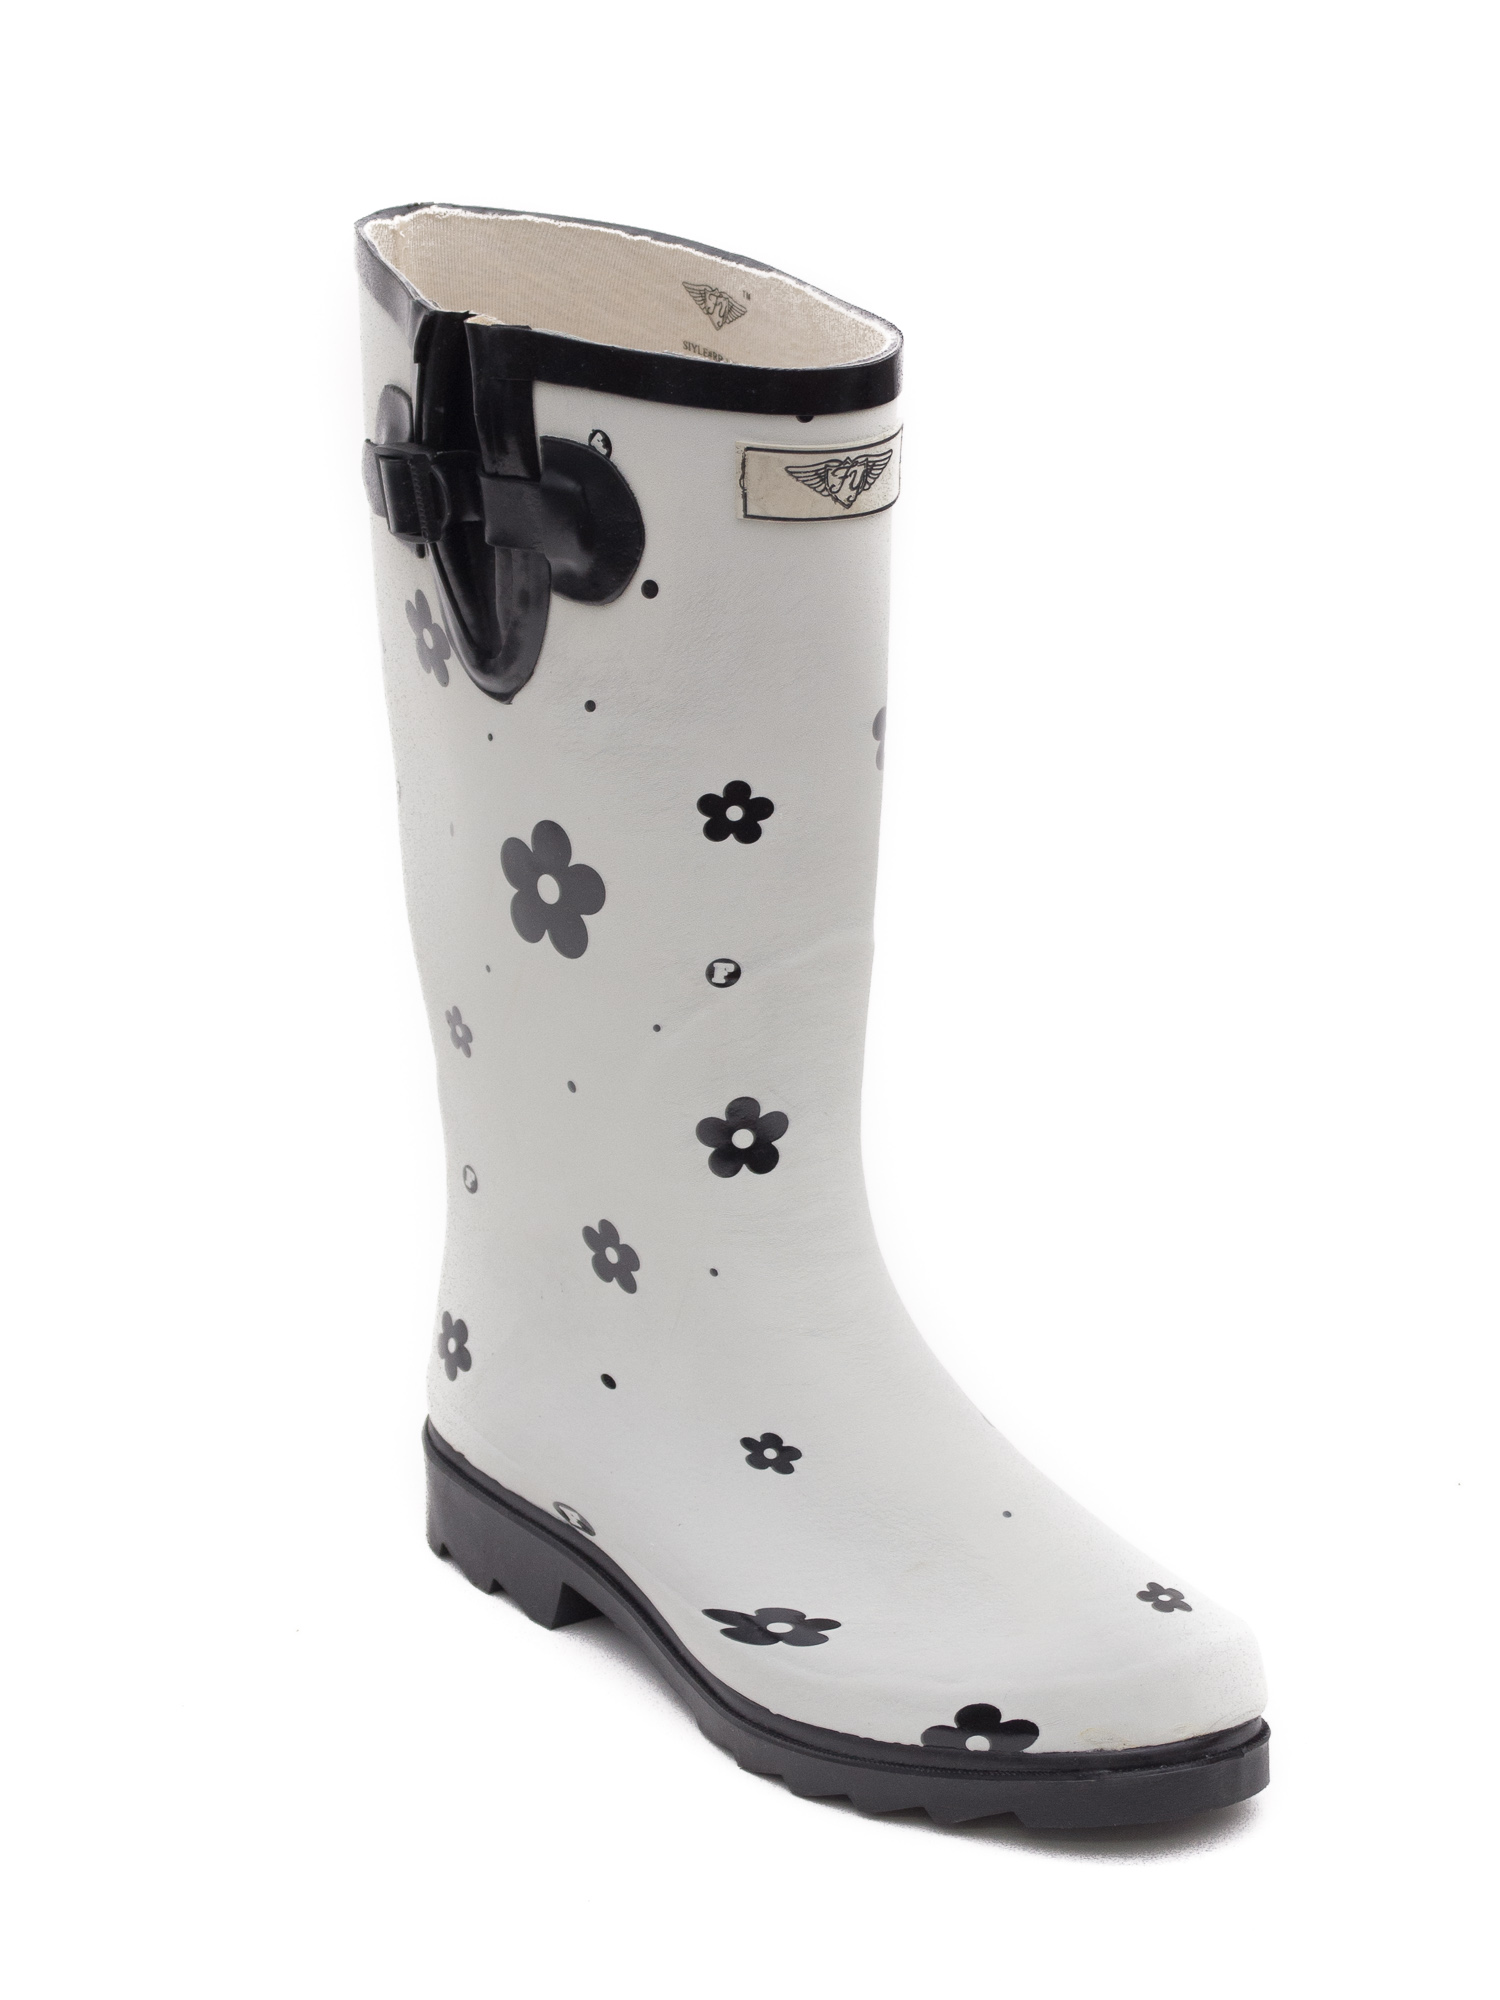 Women Rubber Rain Boots with Cotton Lining, White Flower Matte Design - image 1 of 2